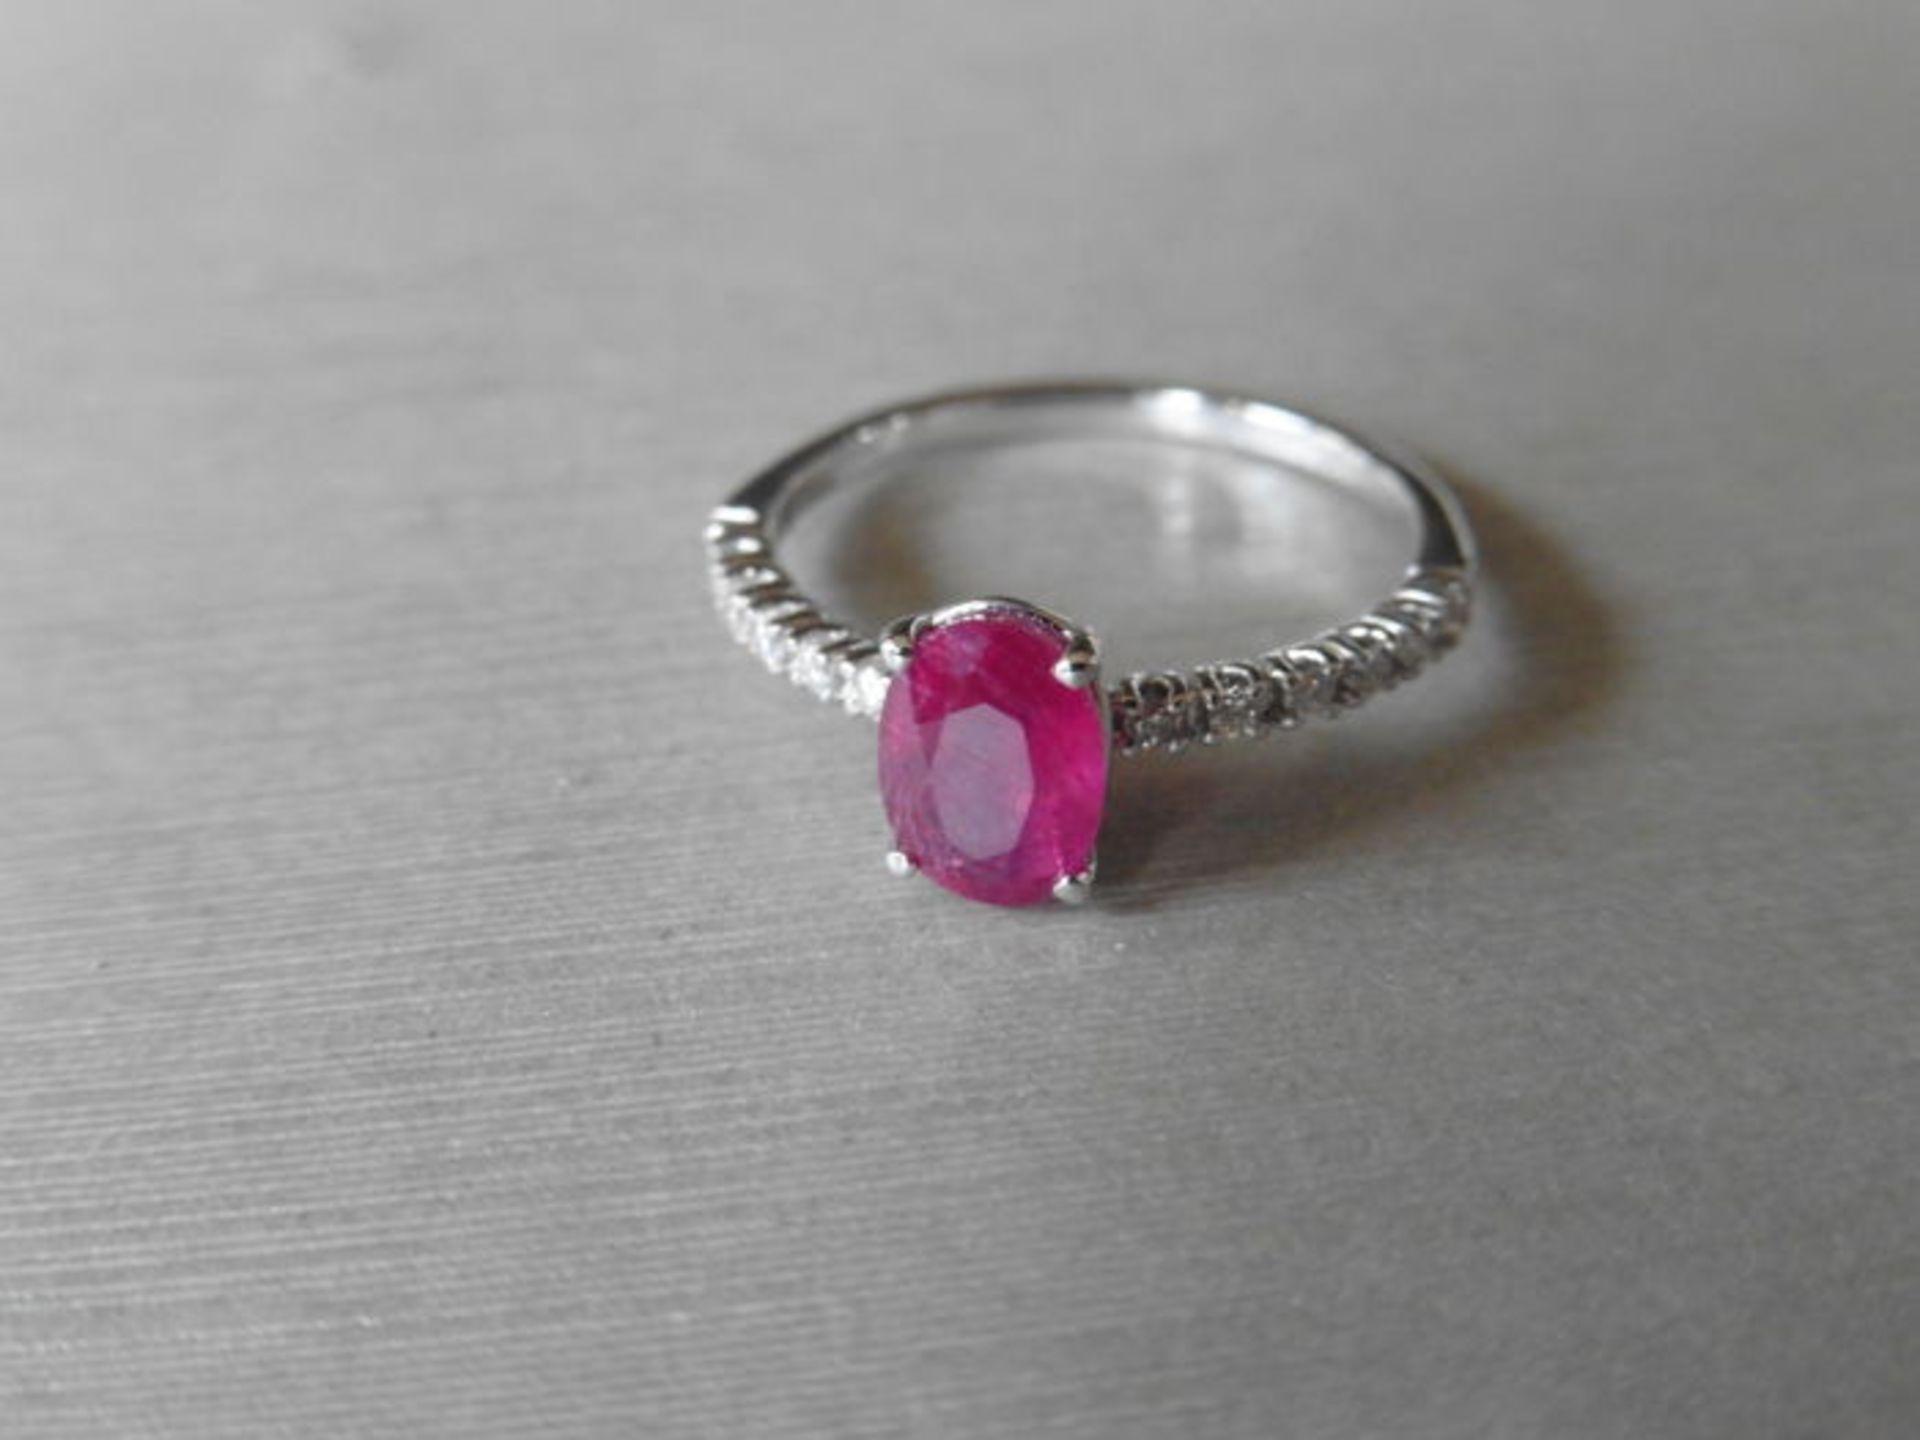 0.80ct / 0.12ct ruby and diamond dress ring. Oval cut ( glass filled) ruby with small diamonds set - Image 3 of 3